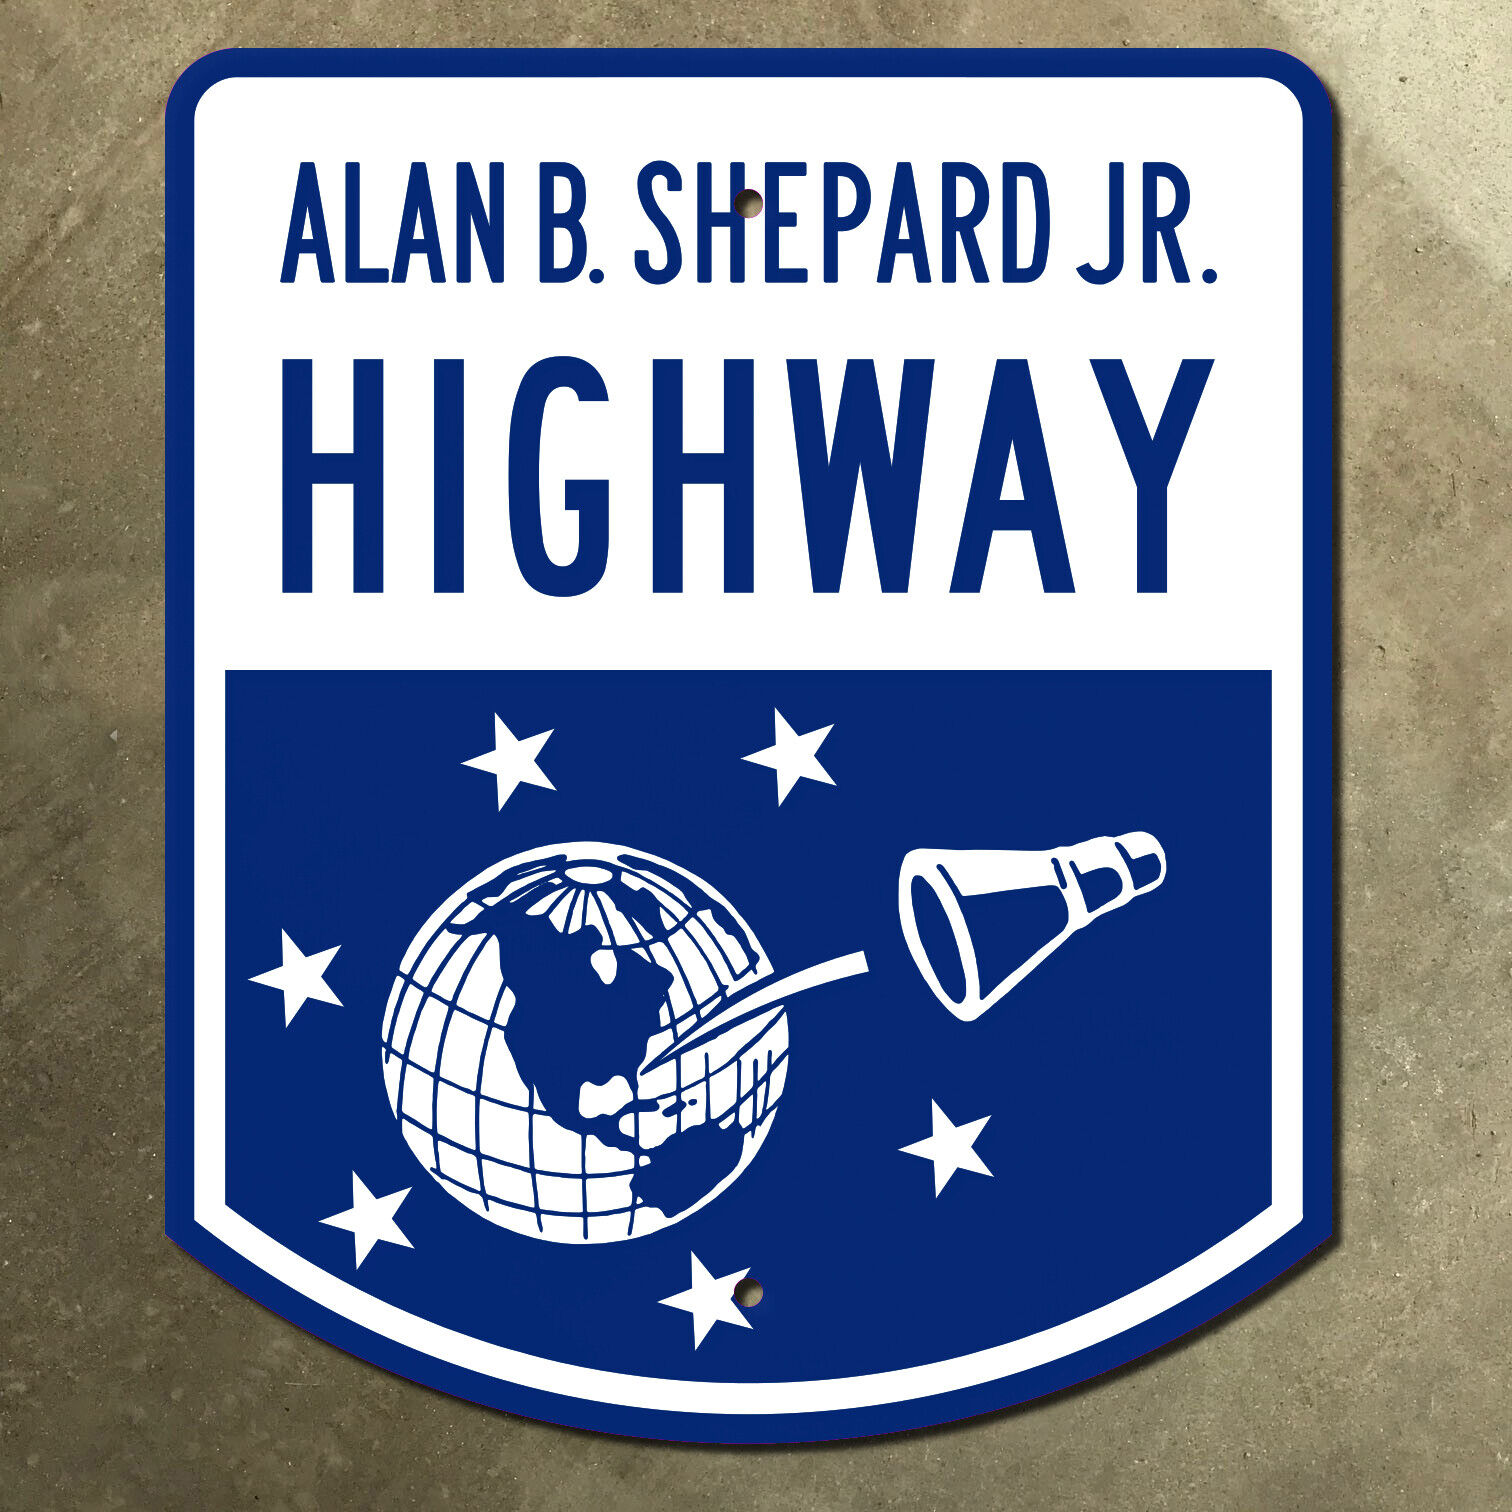 New Hampshire Alan Shepard Highway interstate 93 marker road sign space 15x18